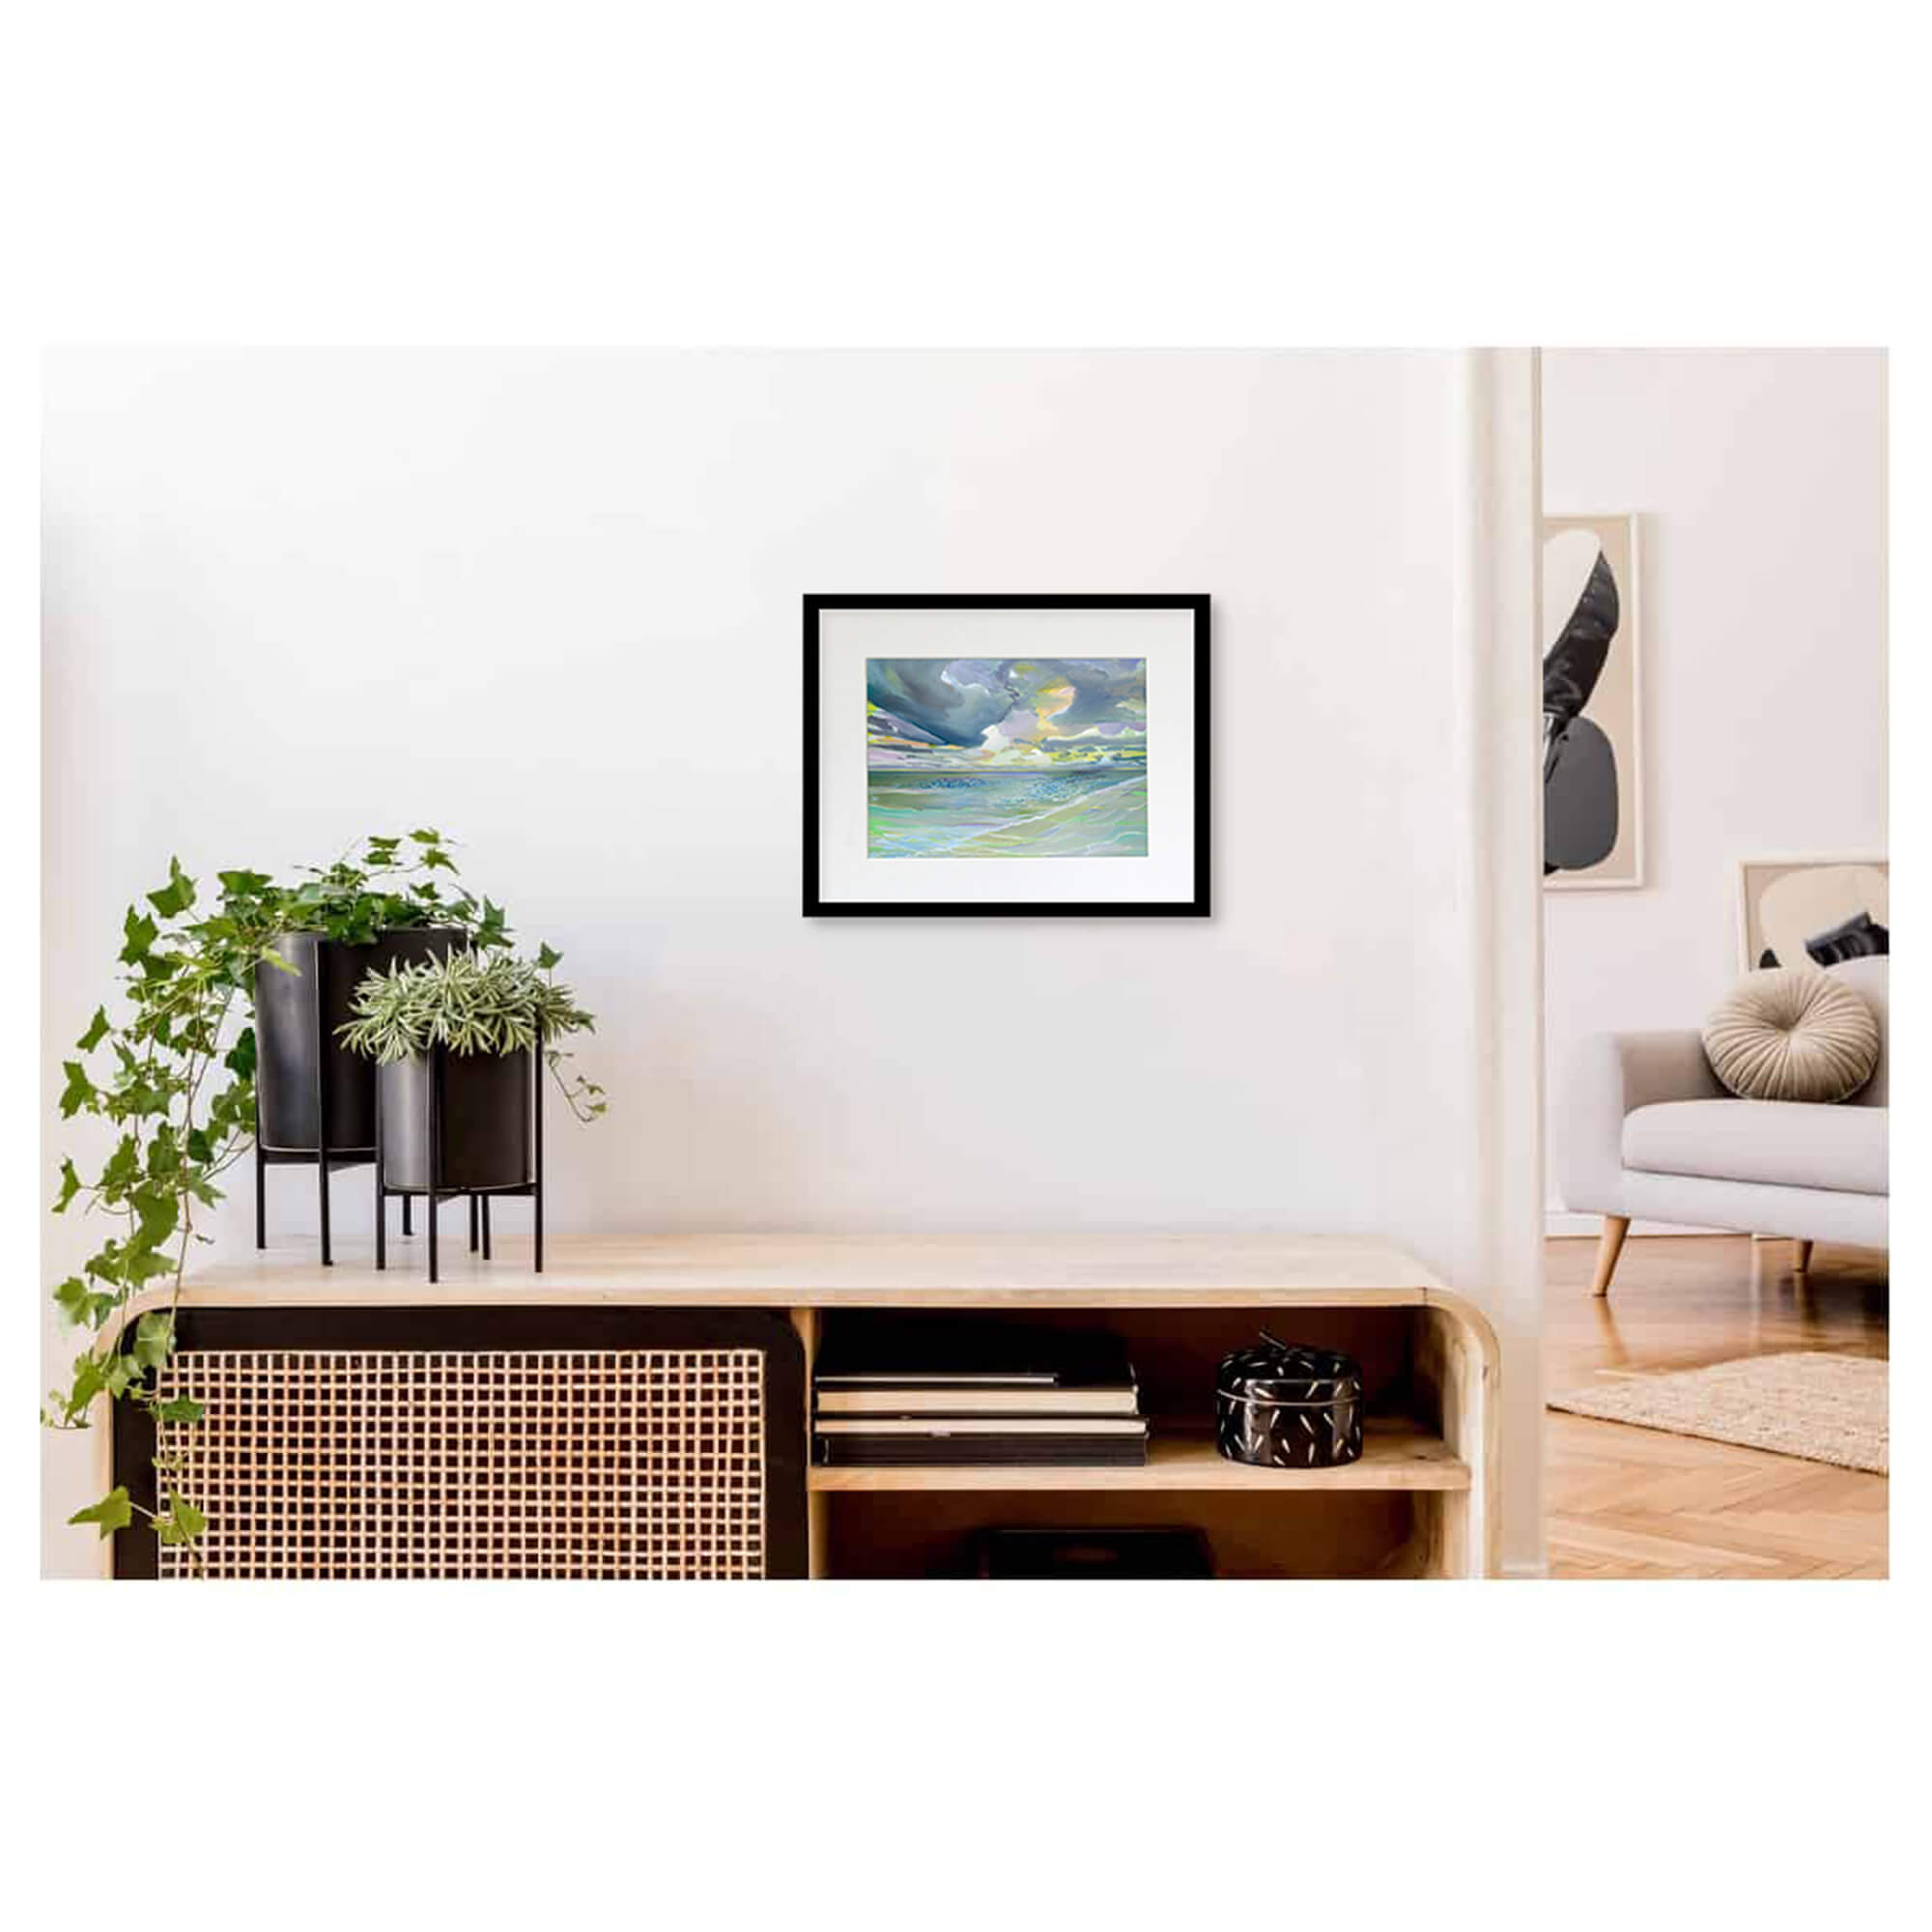 Framed matted art print of a serene seascape with the water reflecting yellow, green, blue, and teal hues by Hawaii artist Saumolia Puapuaga